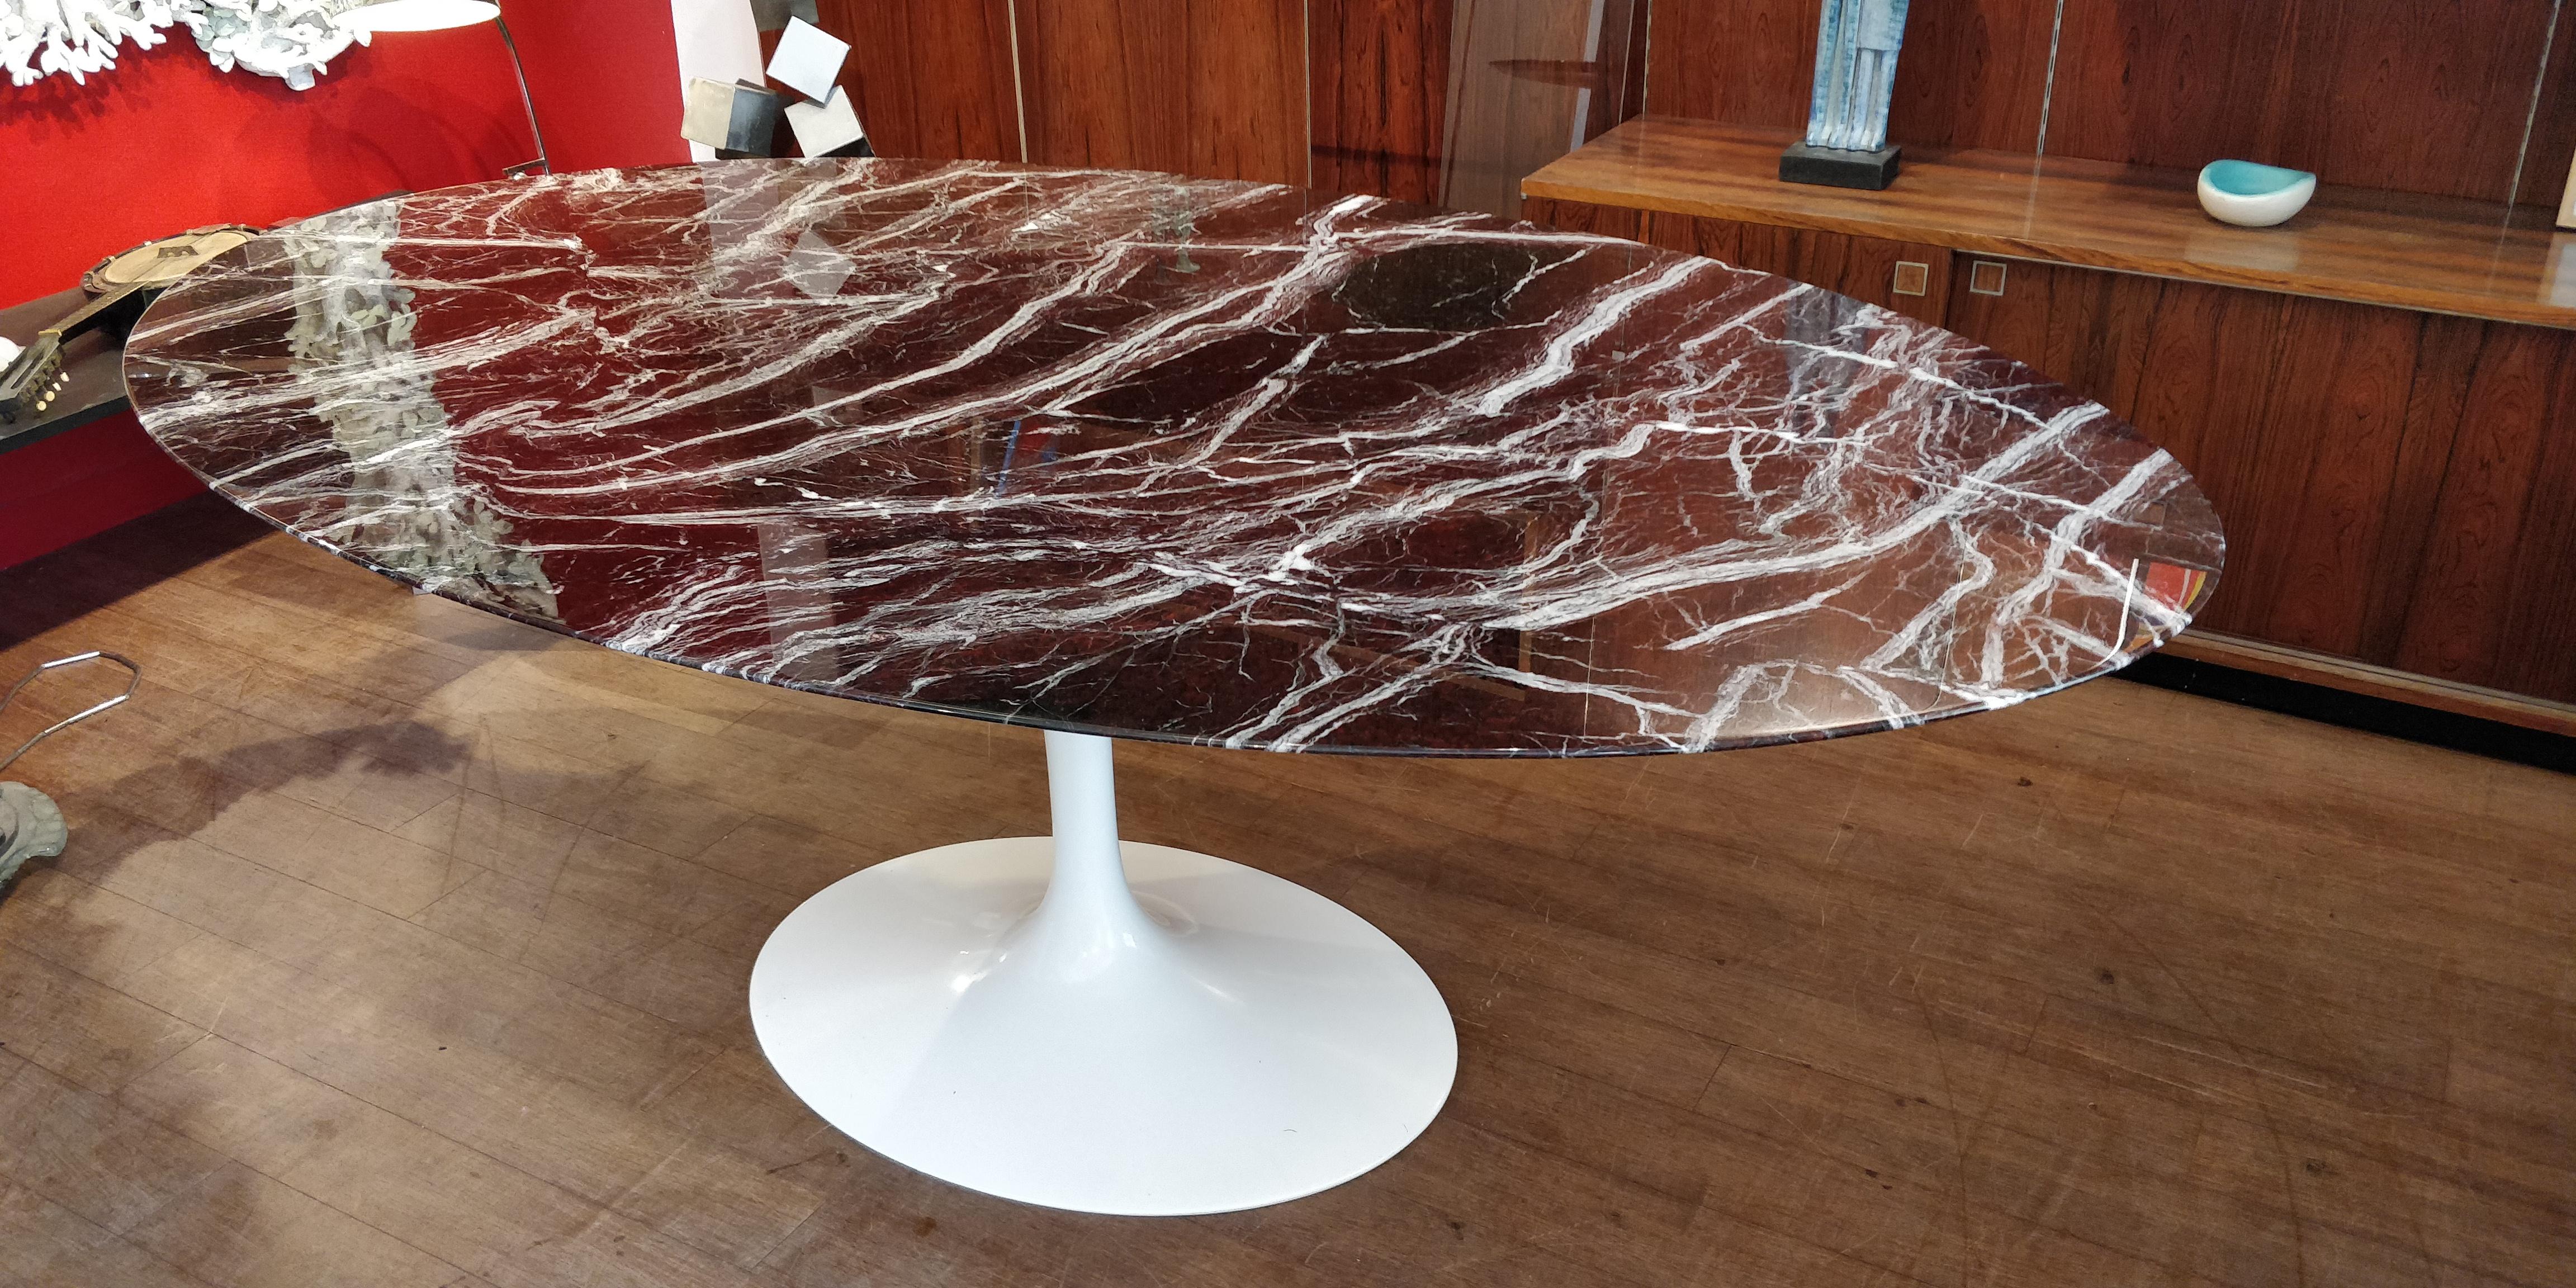 Large oval table from Knoll Studio.

White aluminum tulip foot.

Glossy marble top Rosso Rubino (ruby red) with beautiful white veins.

Rare marble that is no longer produced for these dining tables.

All in excellent condition.